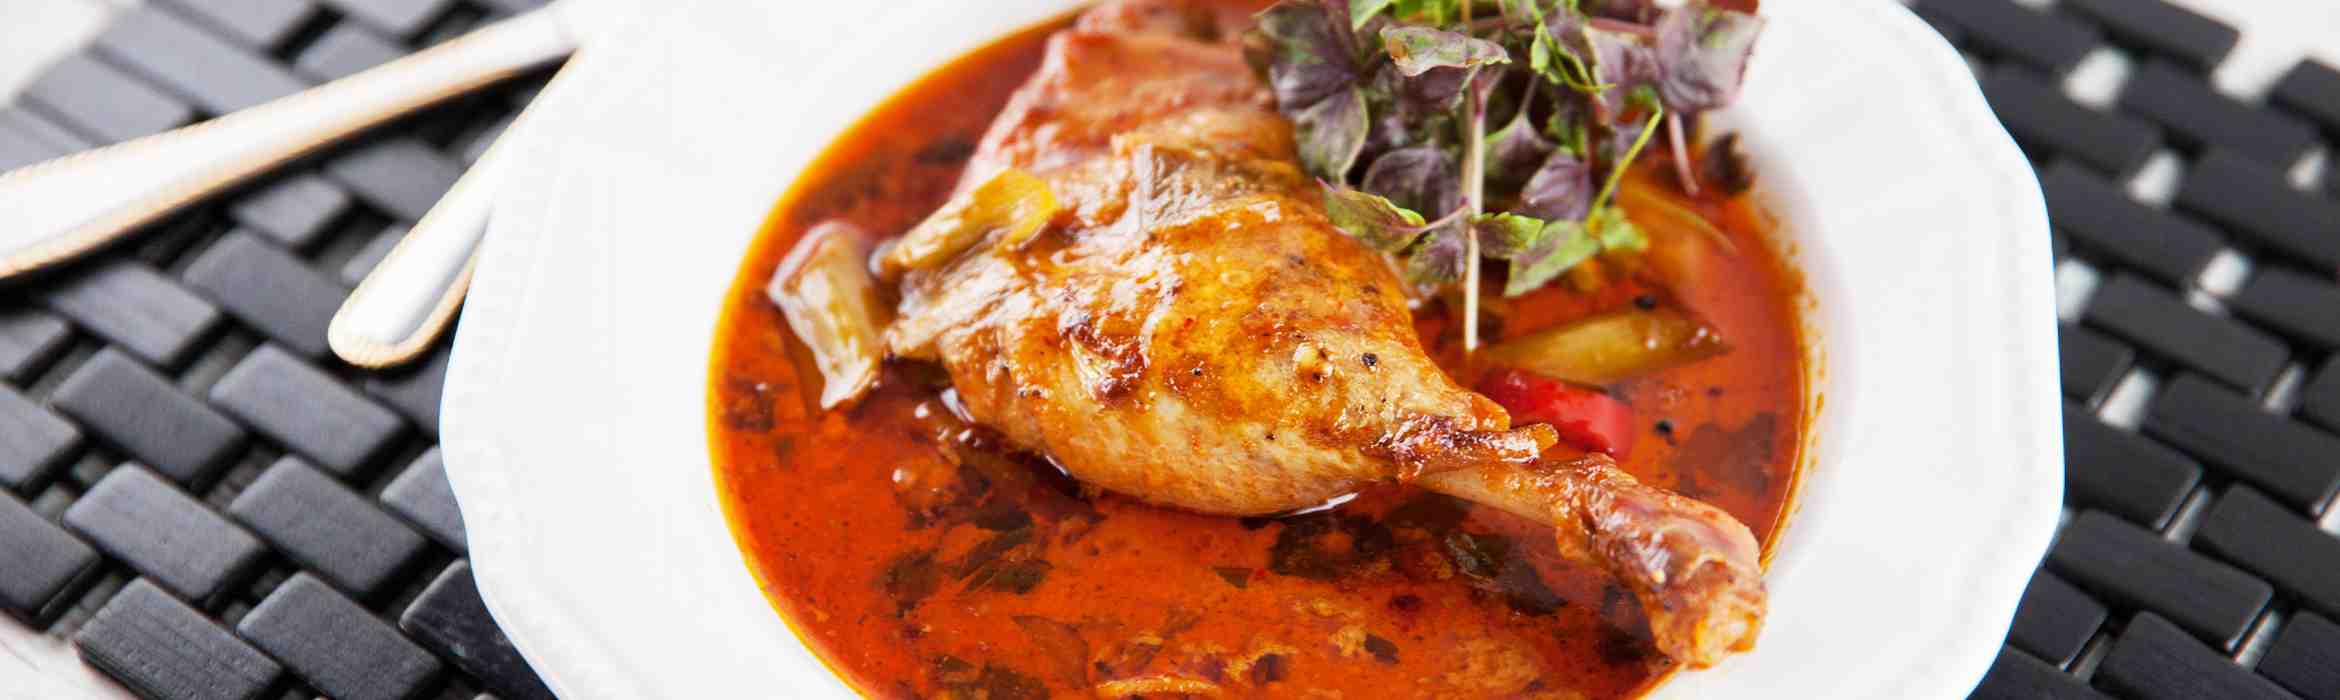 Penang Duck Curry Recipe